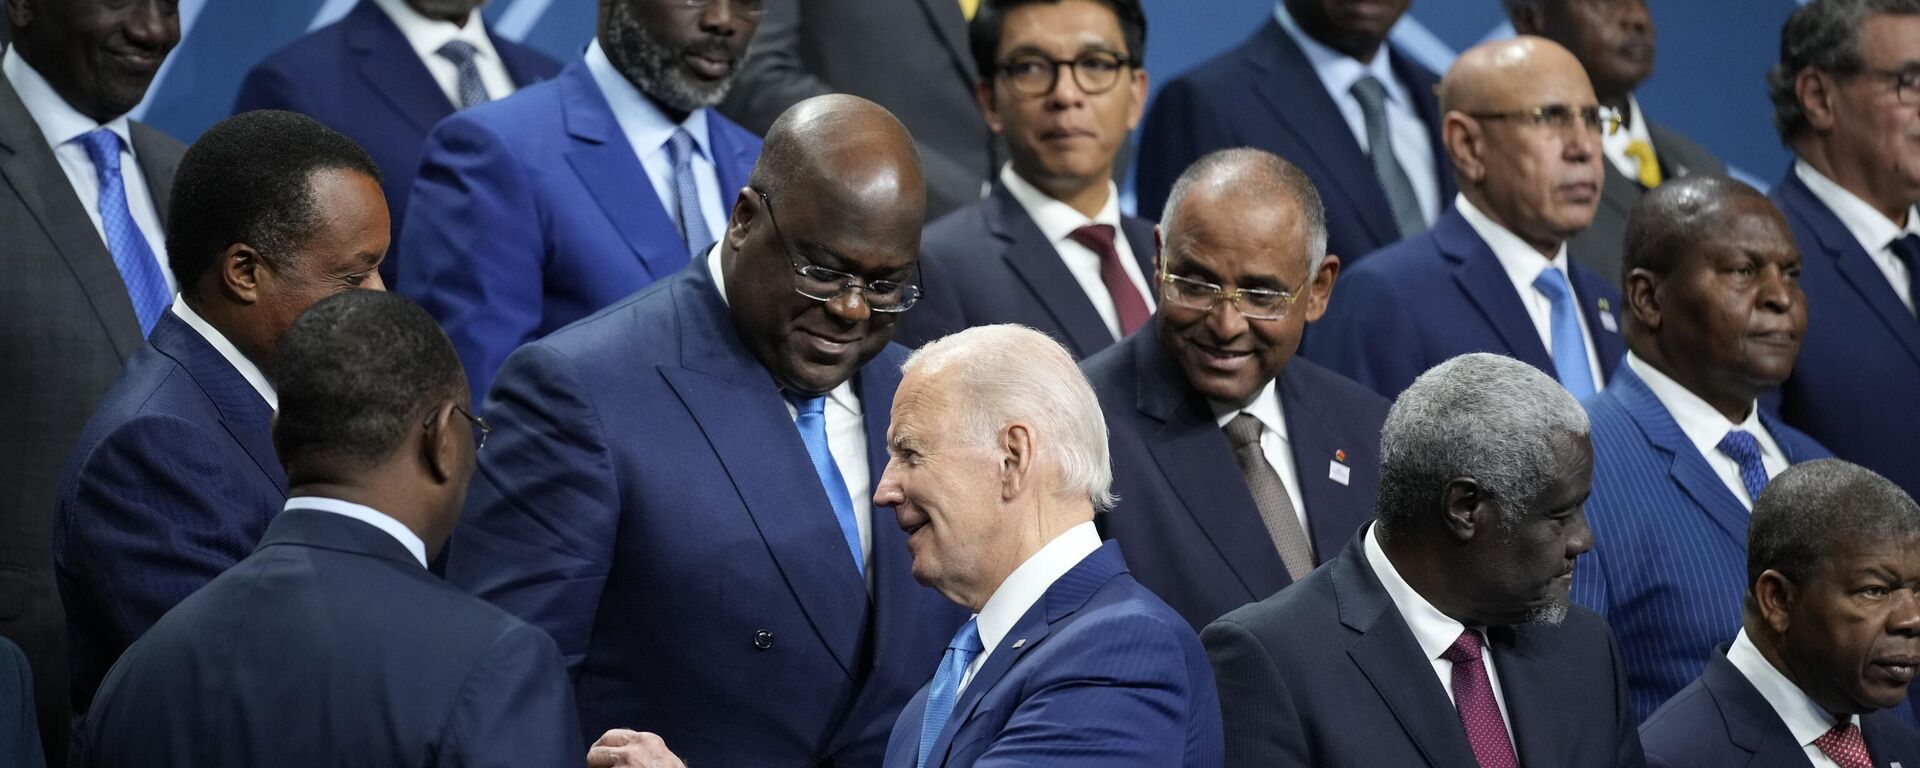 President Joe Biden talks with African leaders before they pose for a family photo during the U.S.-Africa Leaders Summit - Sputnik International, 1920, 16.12.2022